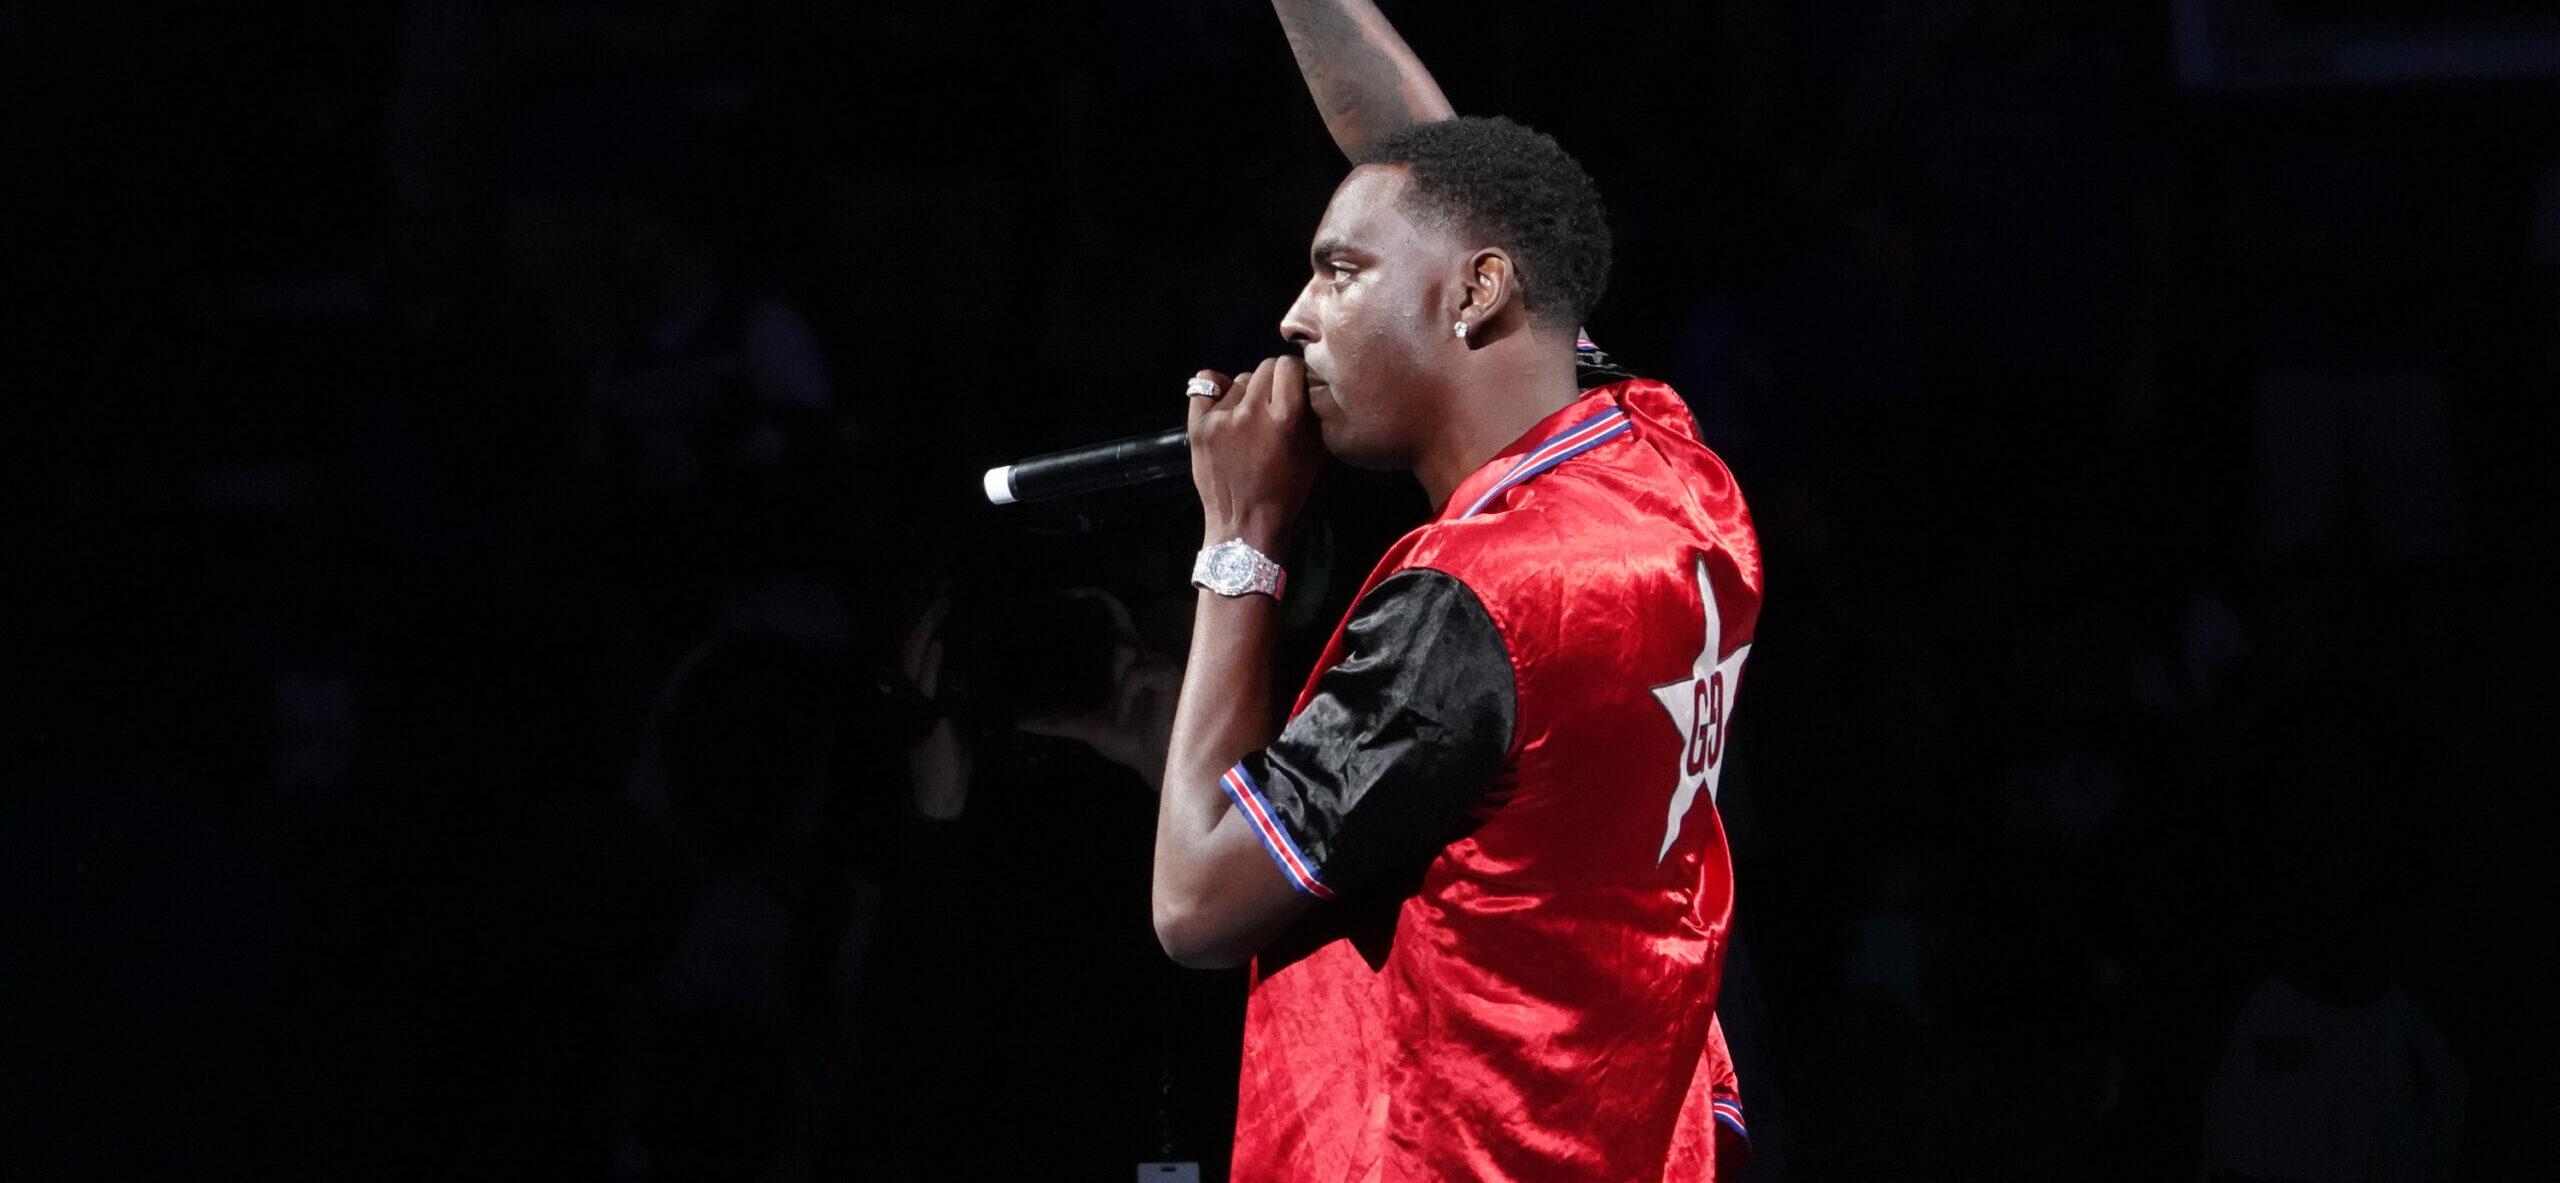 Key Glock Opens Up About Dealing With Young Dolph’s Death, ‘I’m Not Getting Better’